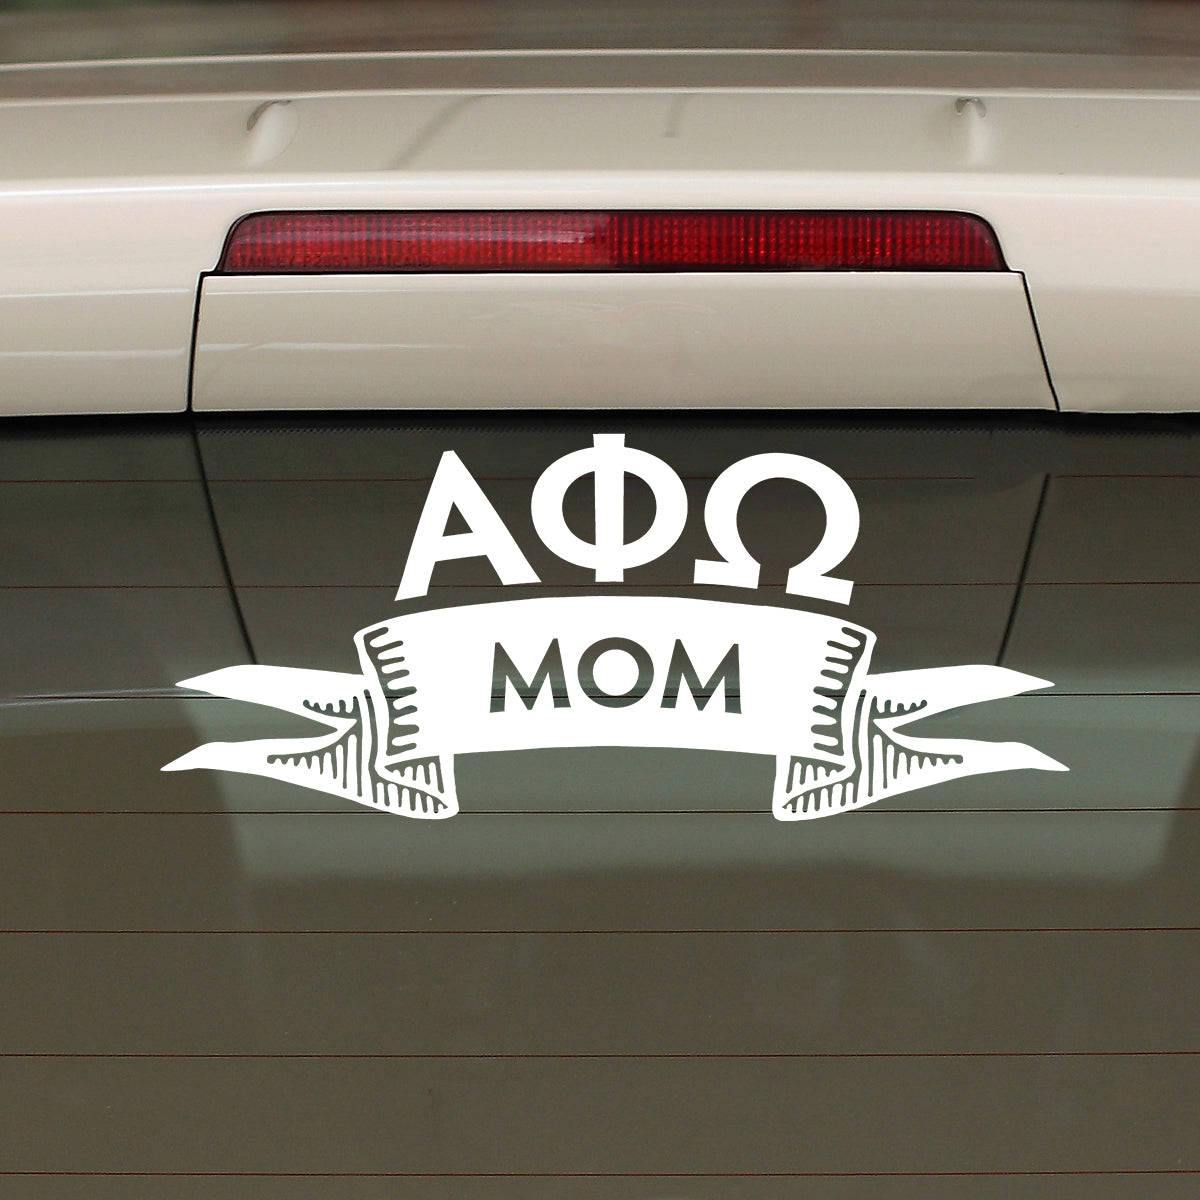 Alpha Phi Omega Mom Gift Pack | Brit and Bee